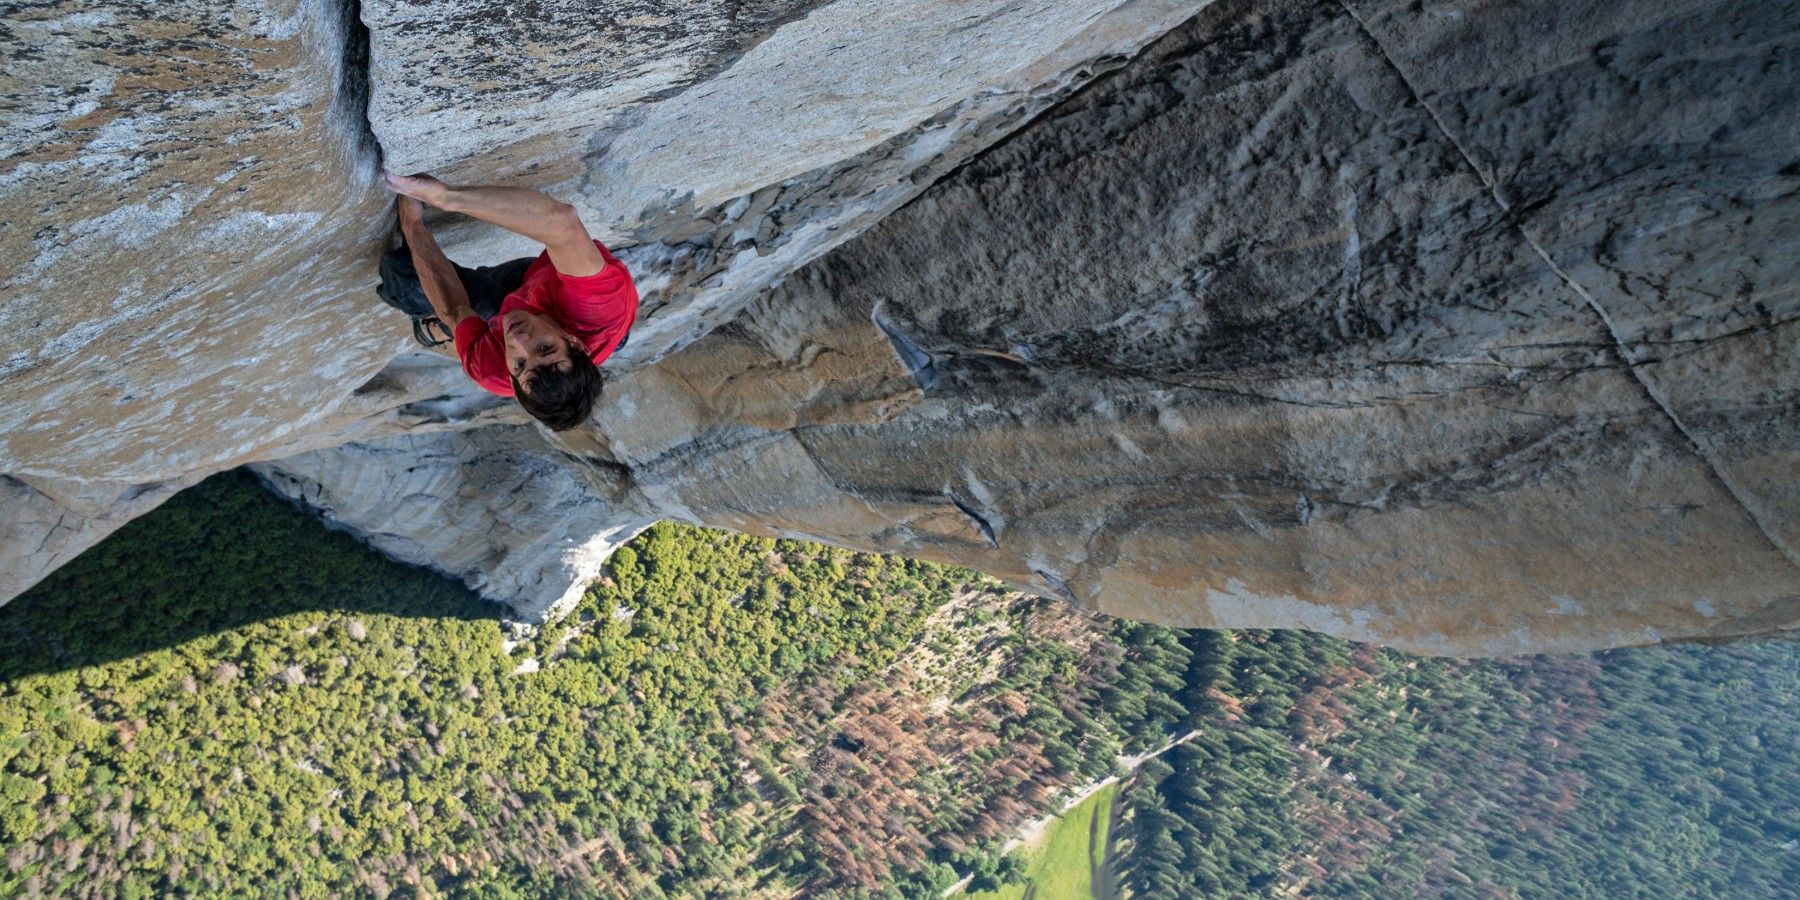 A scene from Free Solo with Alex Honnold climbing El Capitan, shot from above